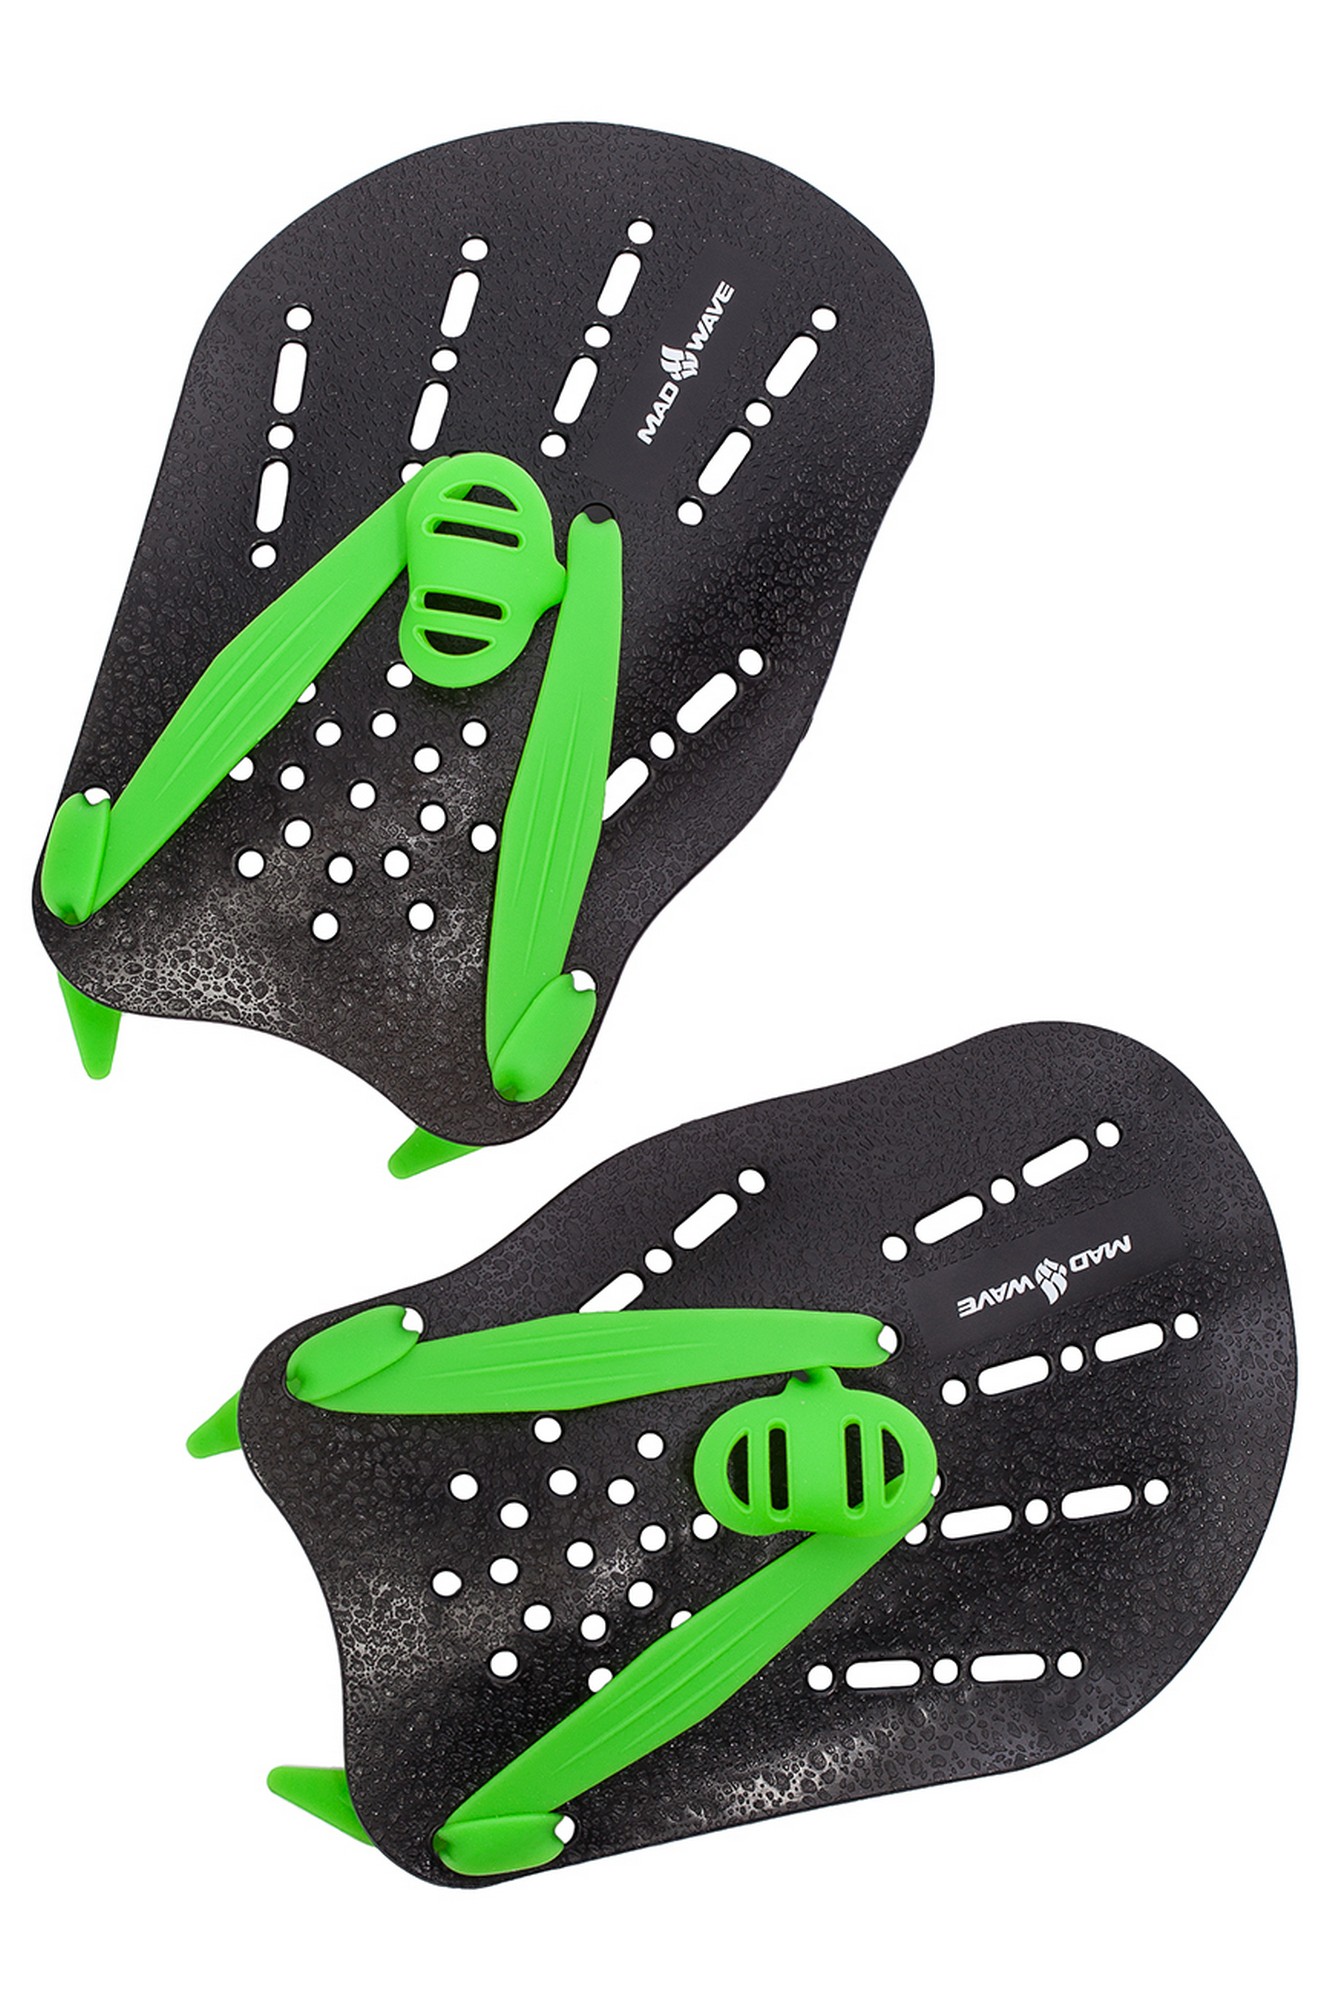  Mad Wave Mad Wave Paddles M0749 06 1 00W